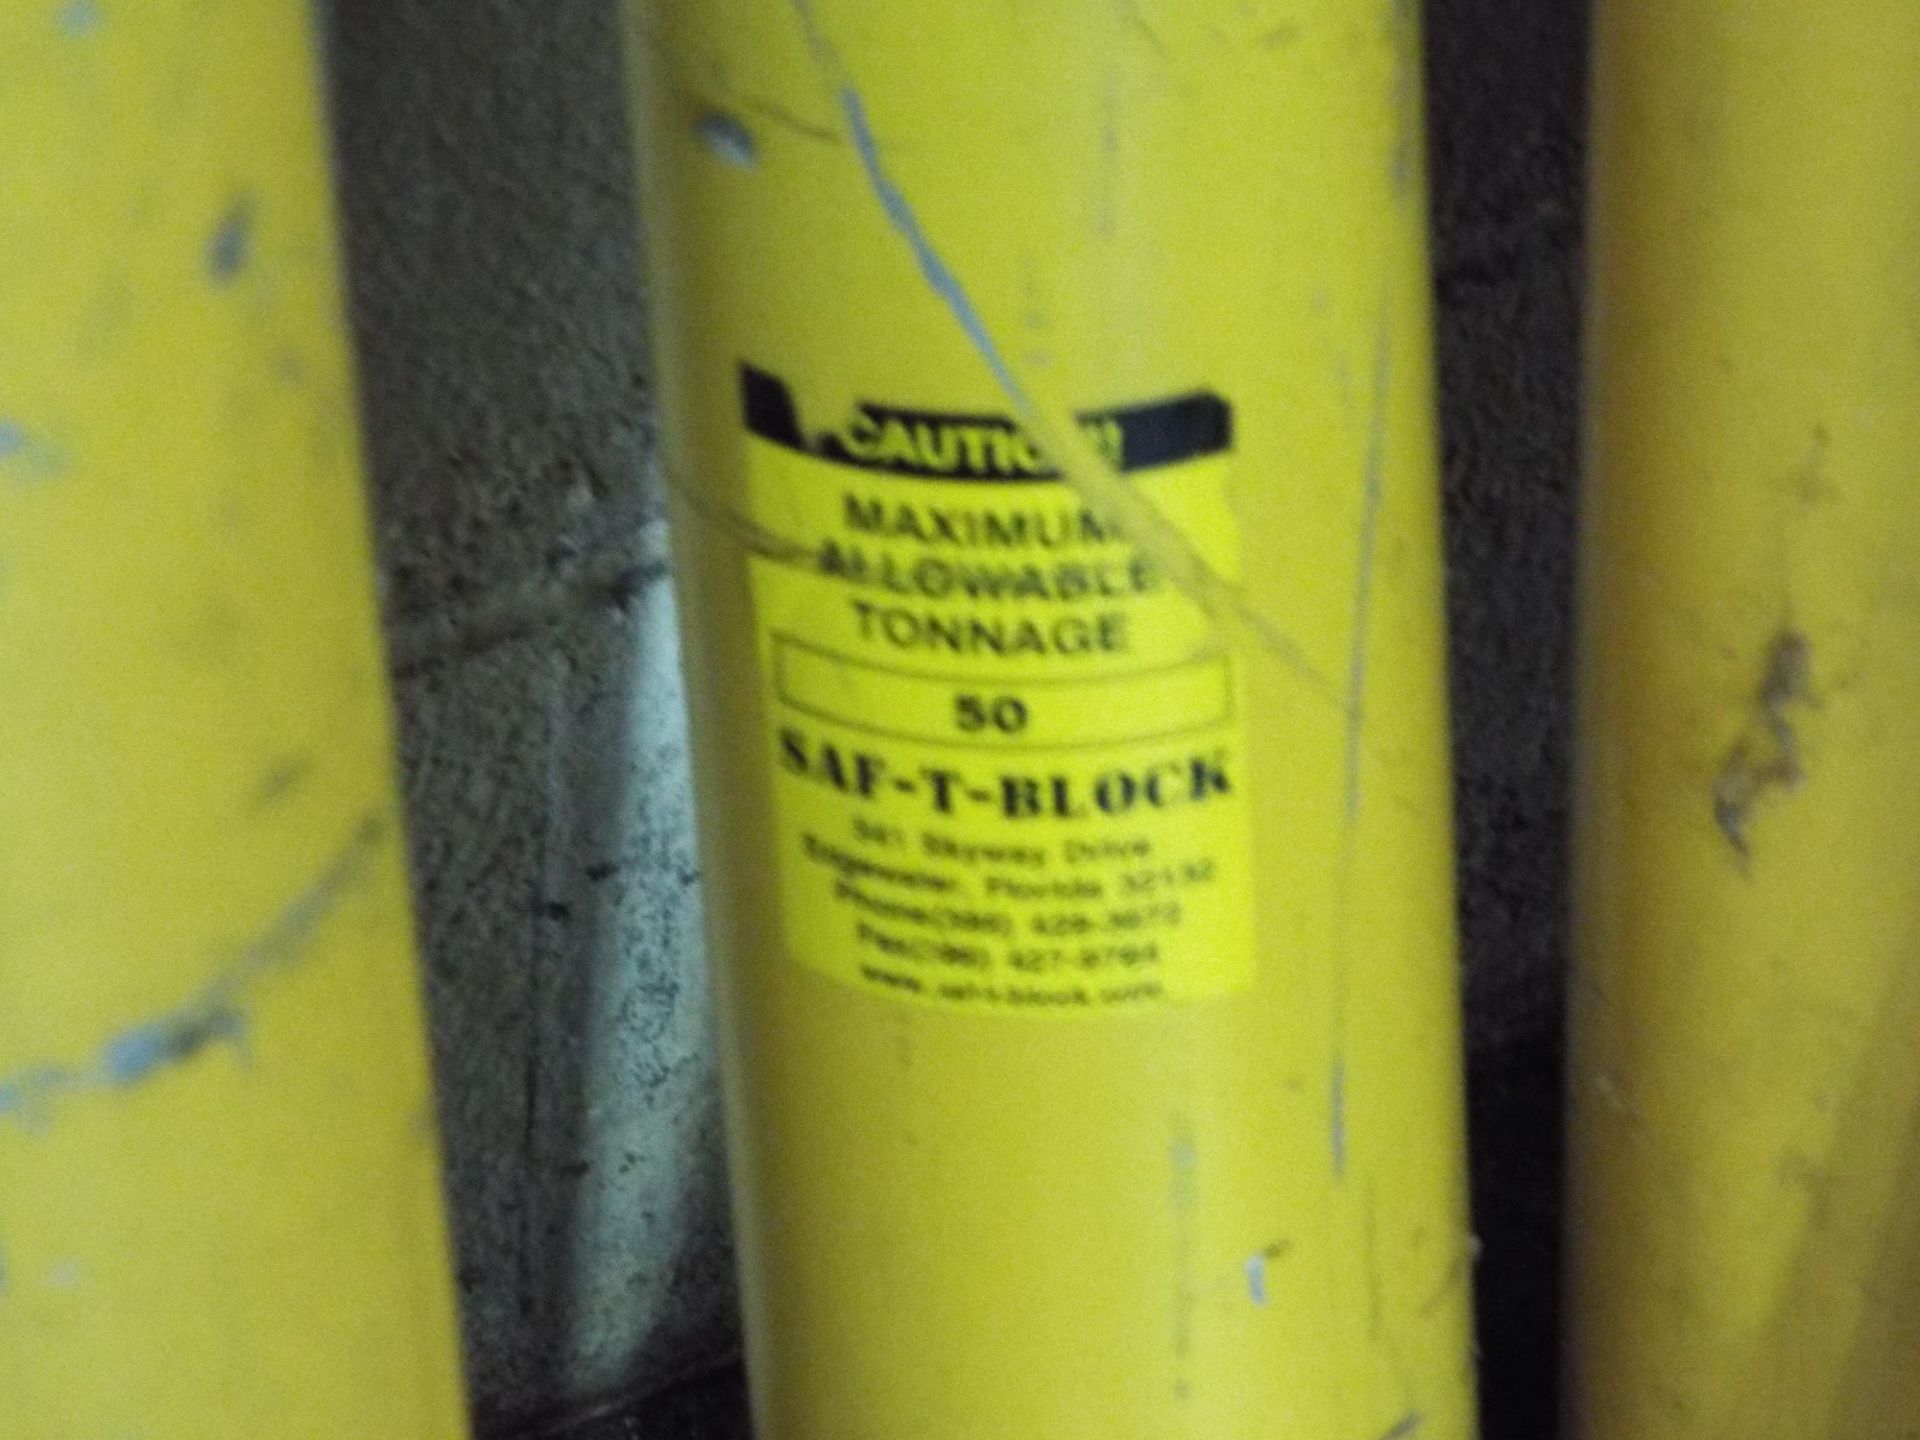 LOT/ SAF-T-BLOCK ADJUSTABLE SAFETY BLOCKS WITH 50 MAX. ALLOWABLE TONNAGE - Image 2 of 2